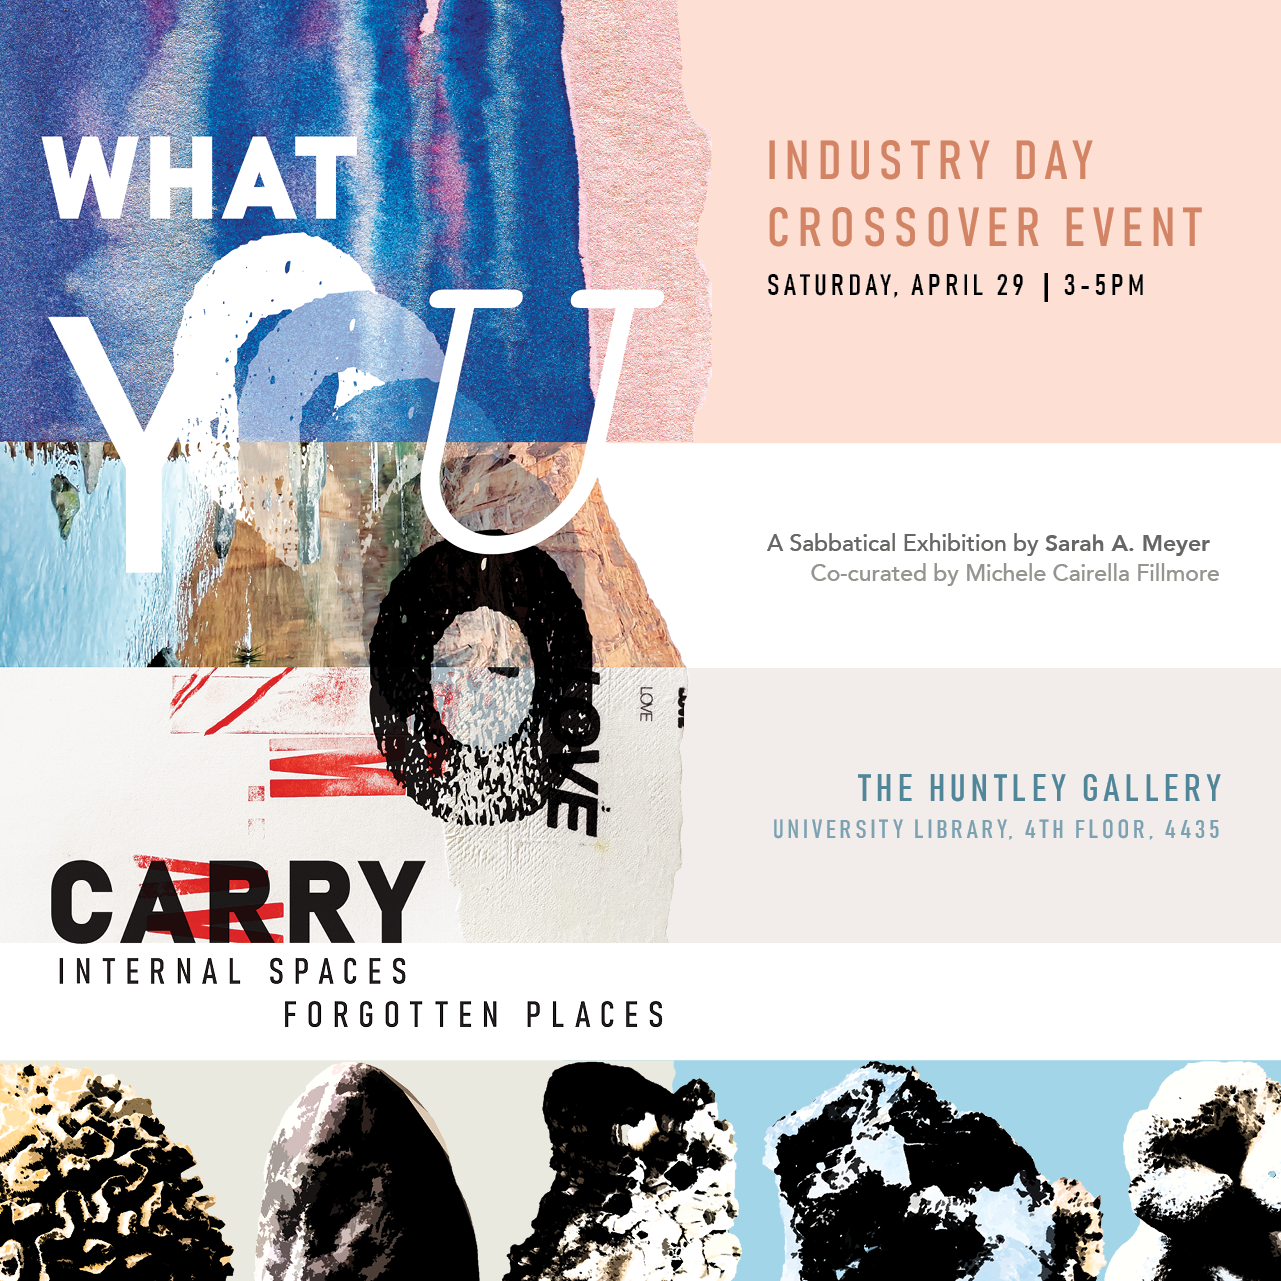 "What You Carry: Internal Spaces, Forgotten Places" |Industry Day Crossover Event, Saturday, April 29 | 3-5 PM, A Sabbatical Exhibition by Sarah A. Meyer, Co-curated by Michele Cairella Fillmore, The Huntley Gallery University Library, 4th Floor 4435